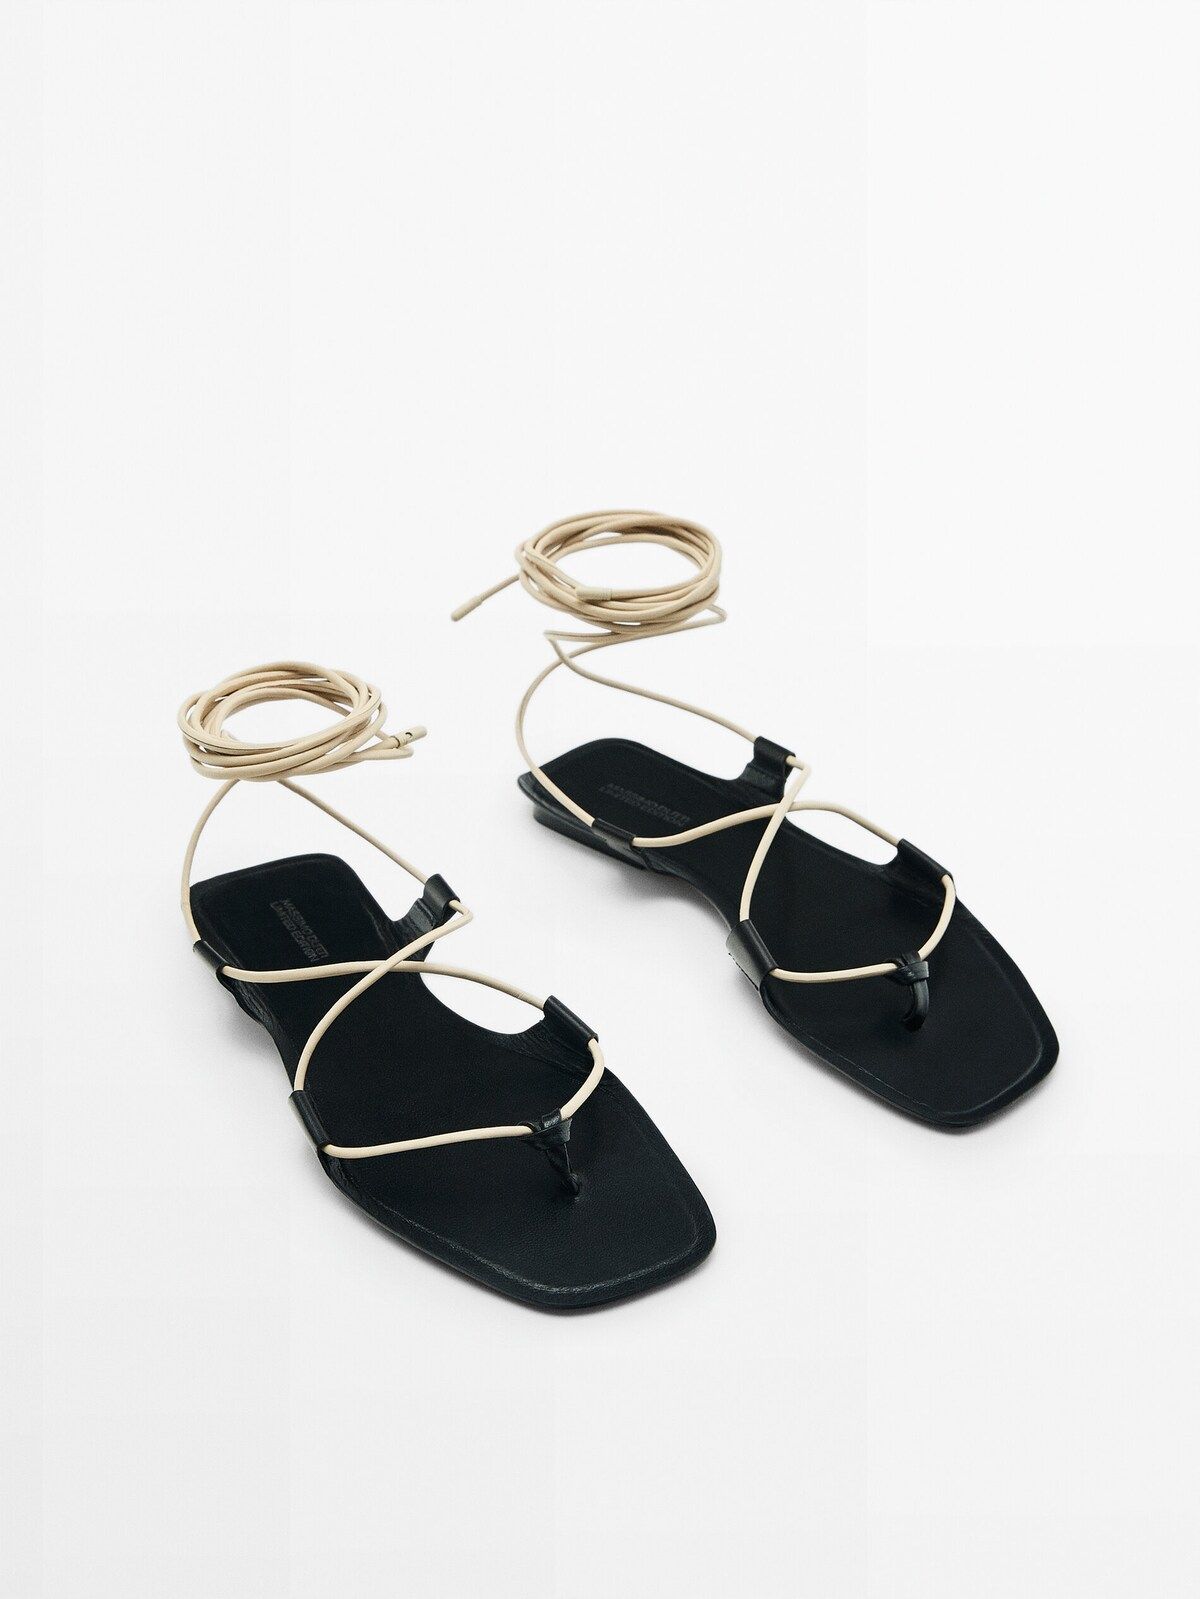 LEATHER FLAT TIED SANDALS - LIMITED EDITION | Massimo Dutti (US)